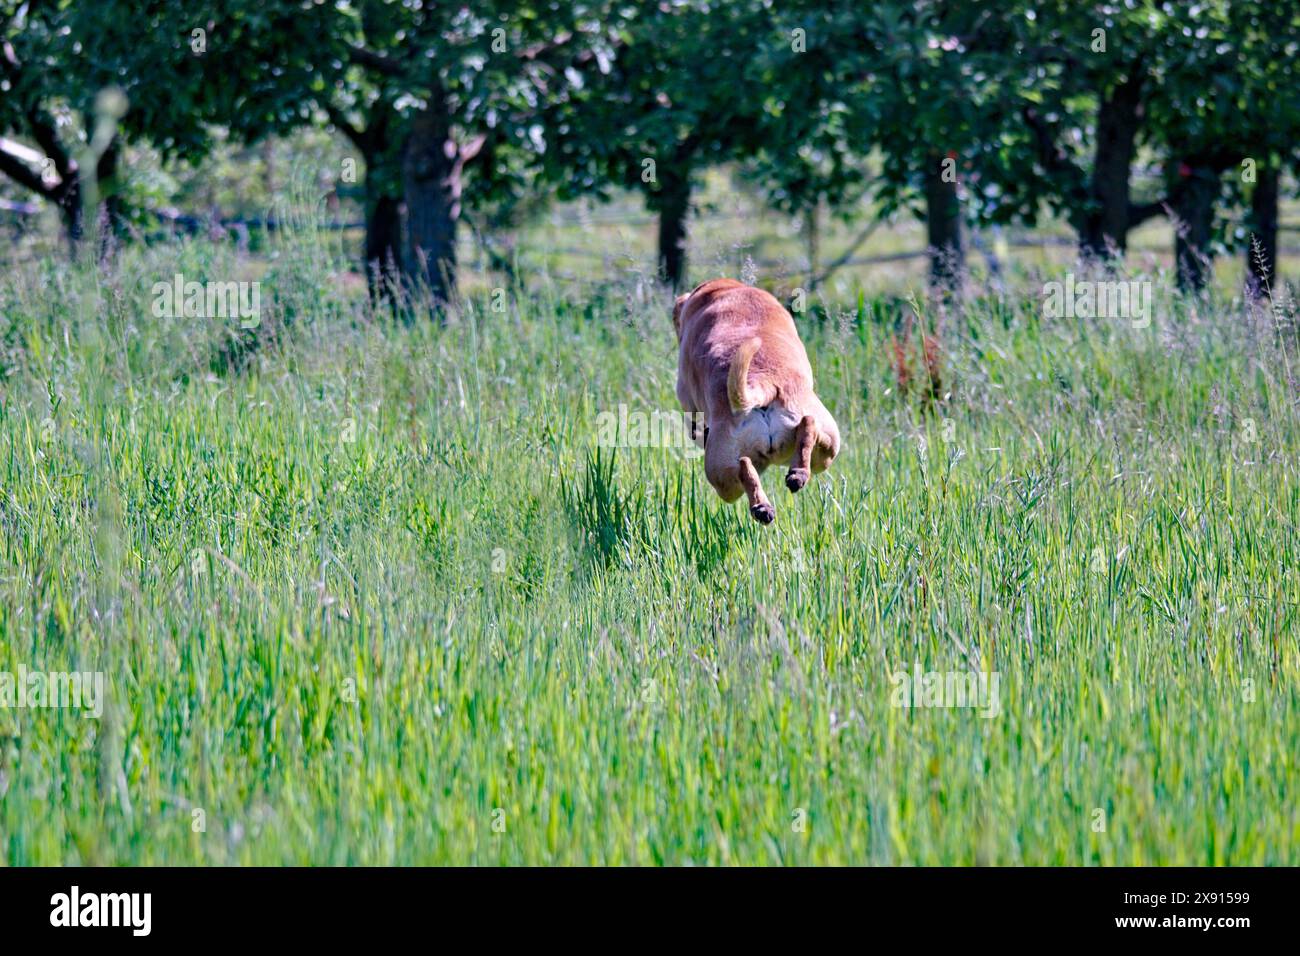 Mix of Amstaff dog jumping in the grass background. Stock Photo